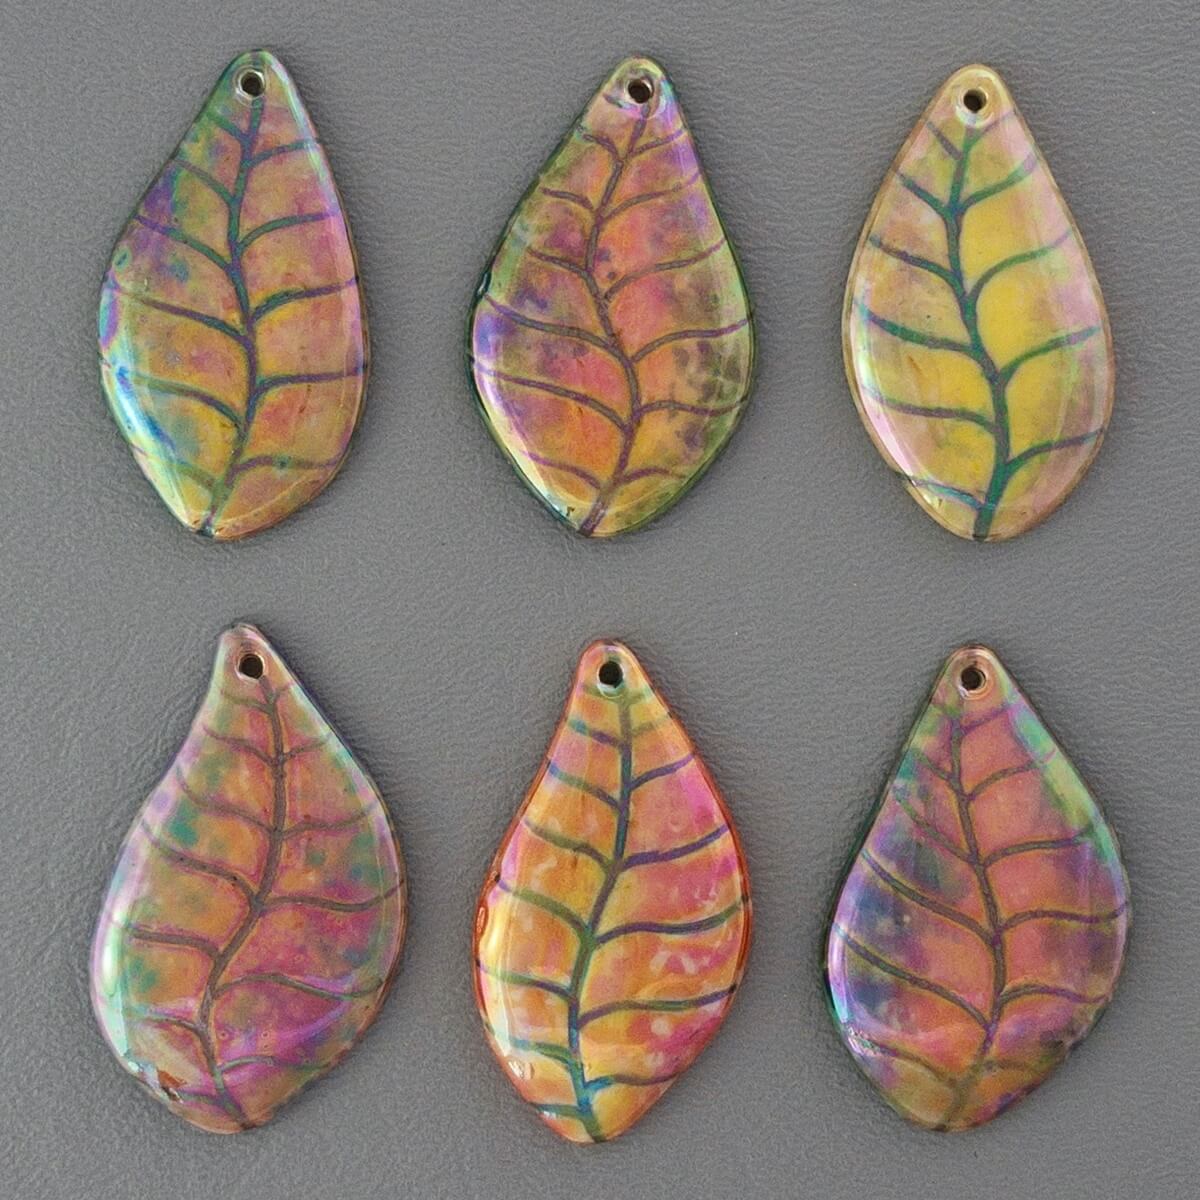 Fall leaf pendants, each handpainted with multiple colors.